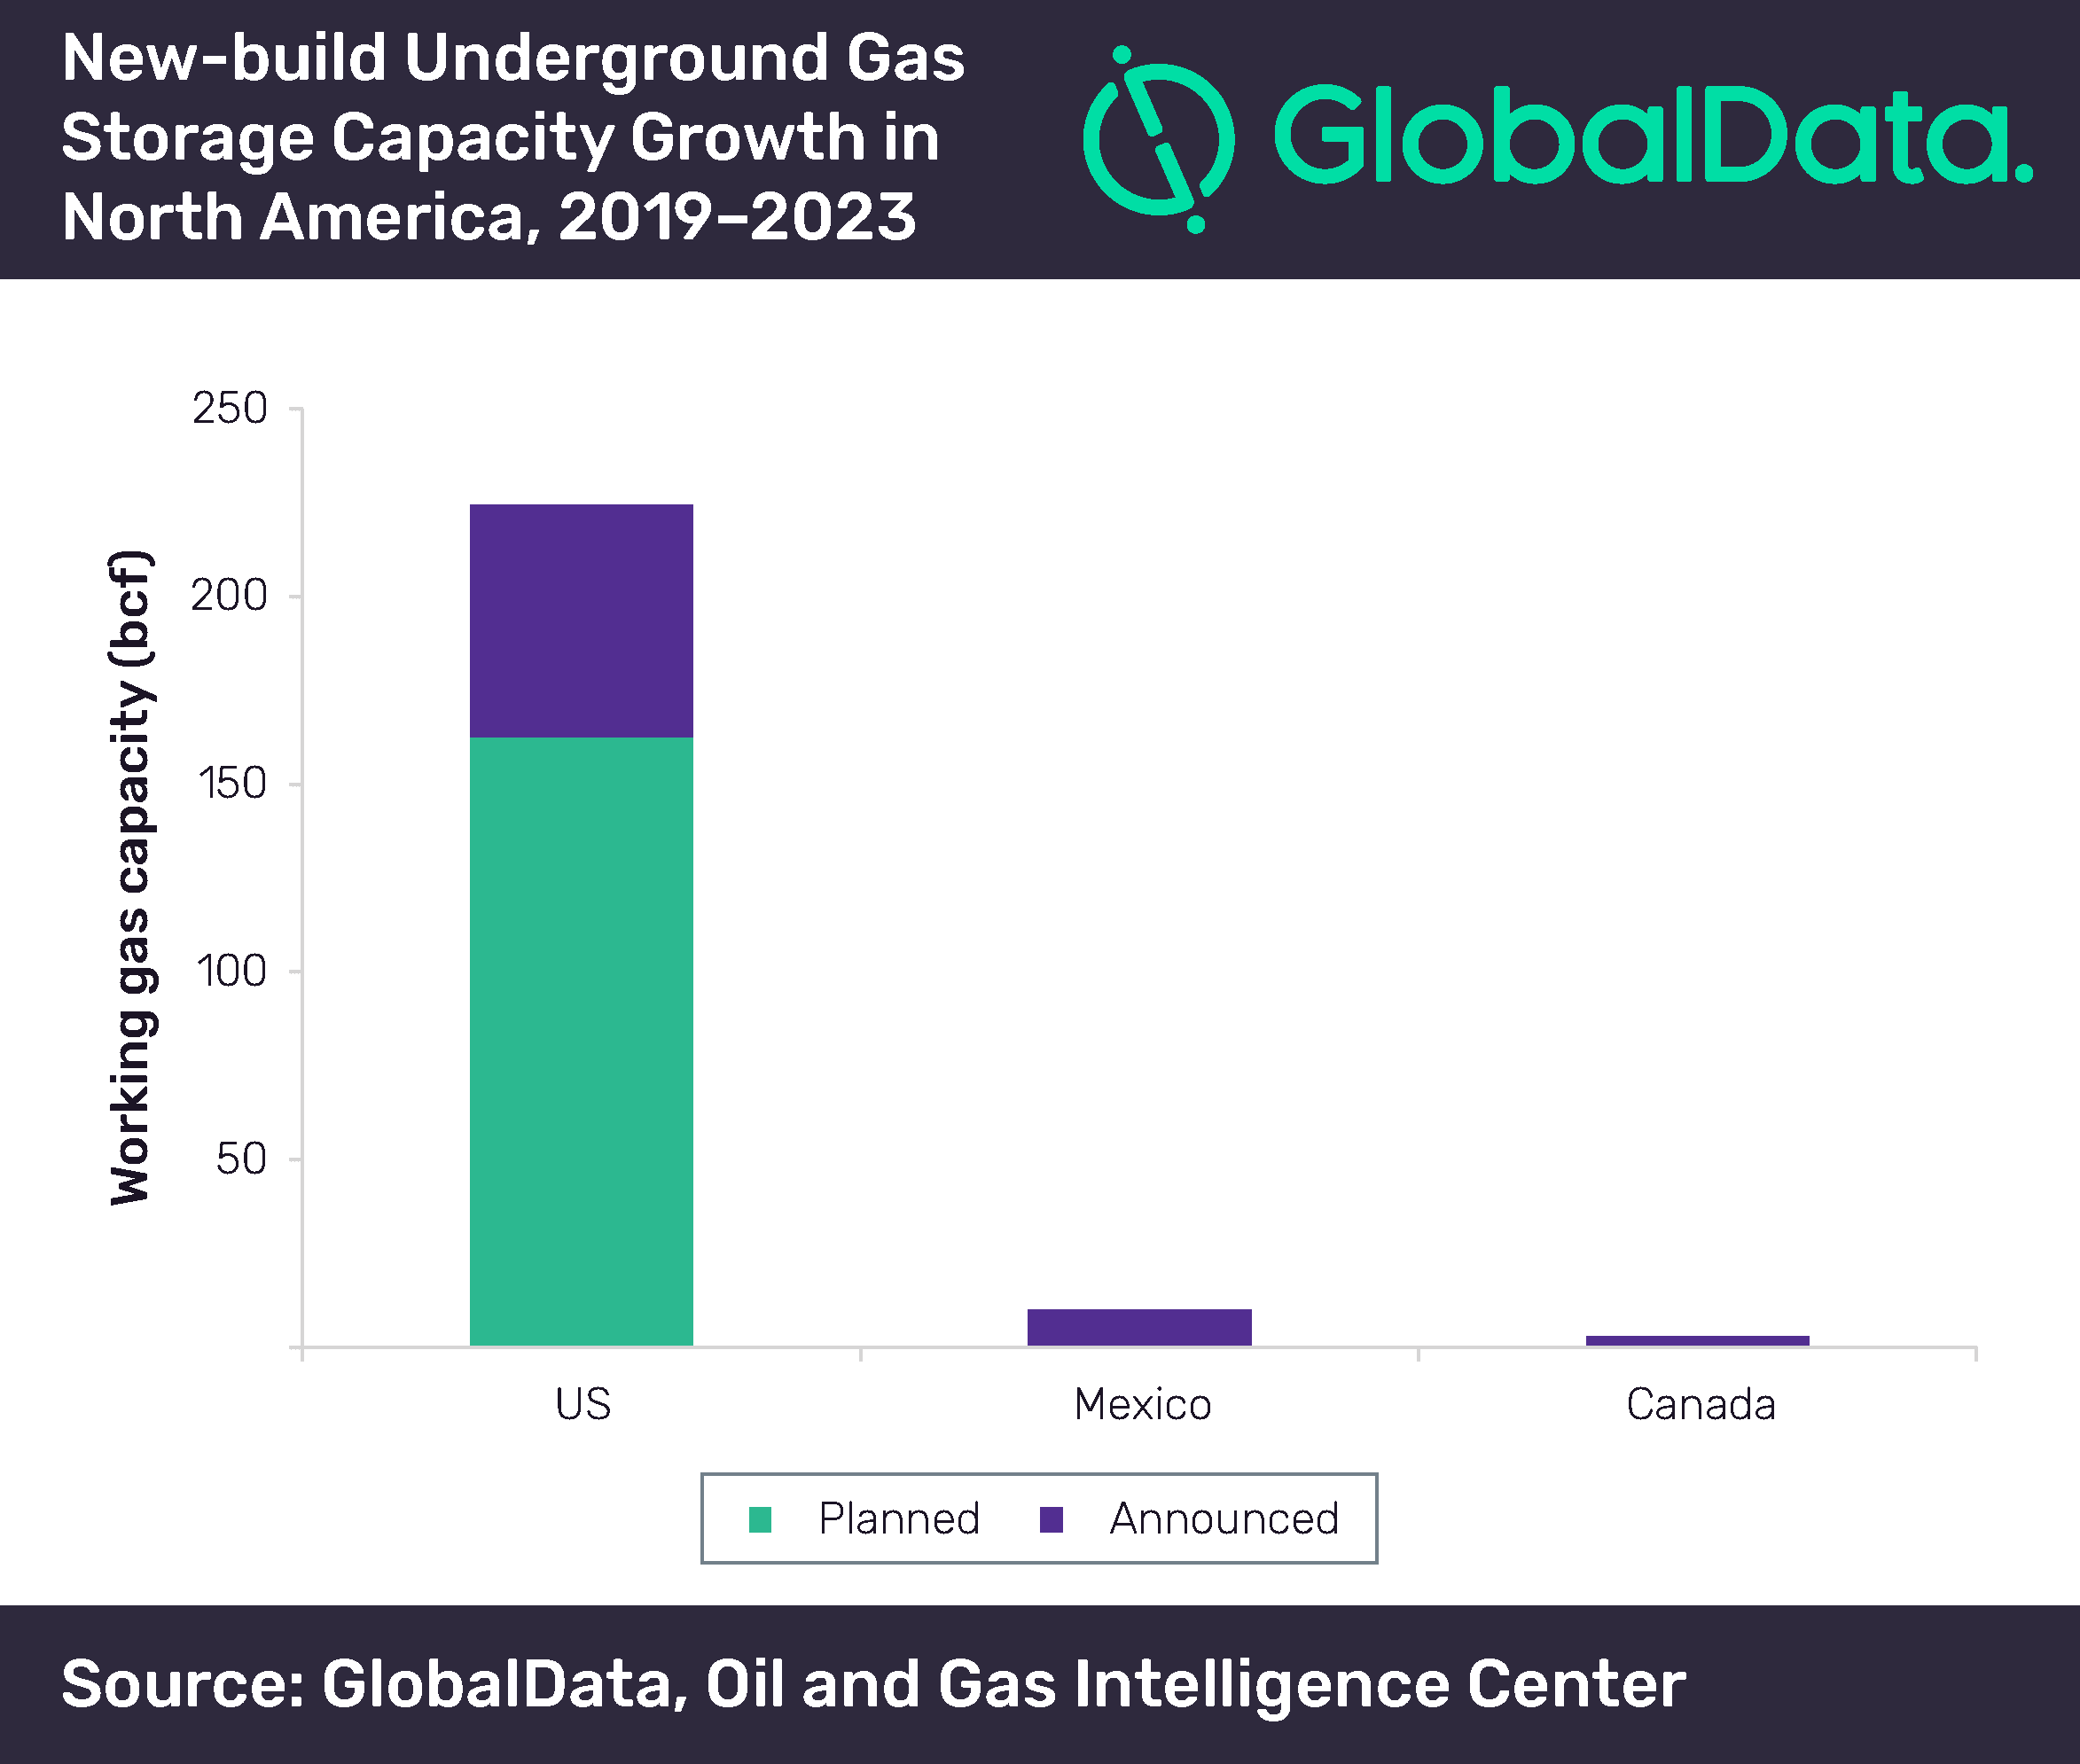 US will contribute 95% of North America’s new-build underground gas storage capacity growth by 2023